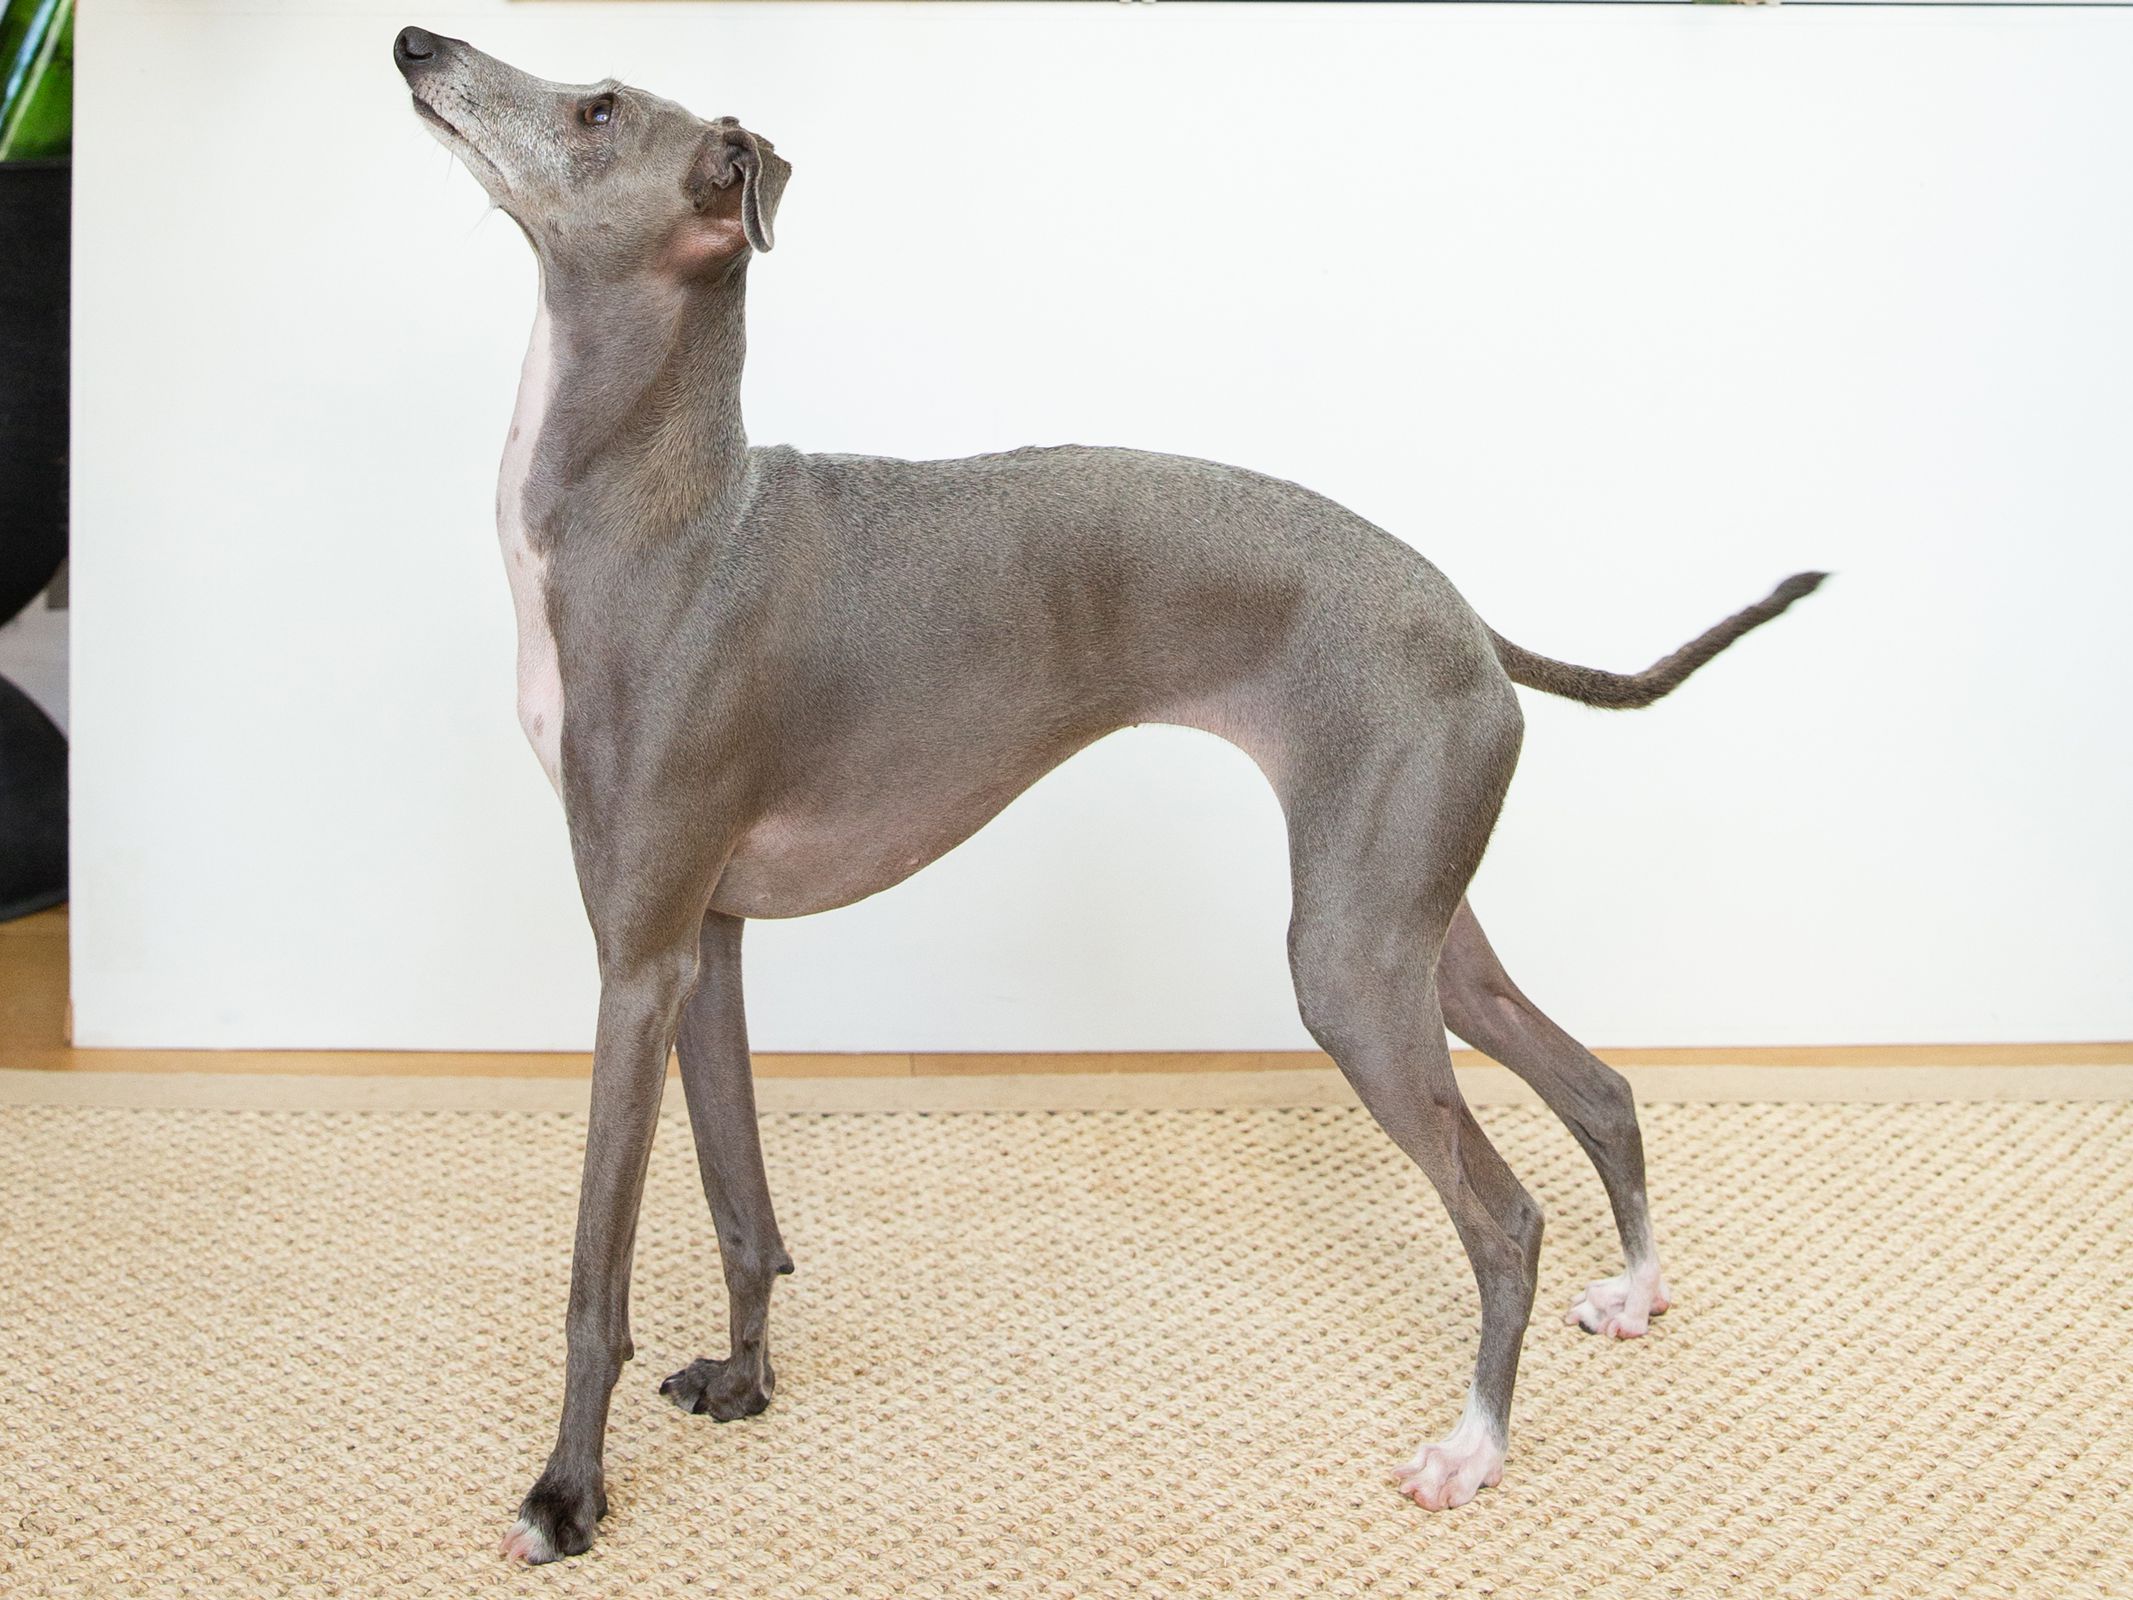 What are Italian Greyhounds known for?